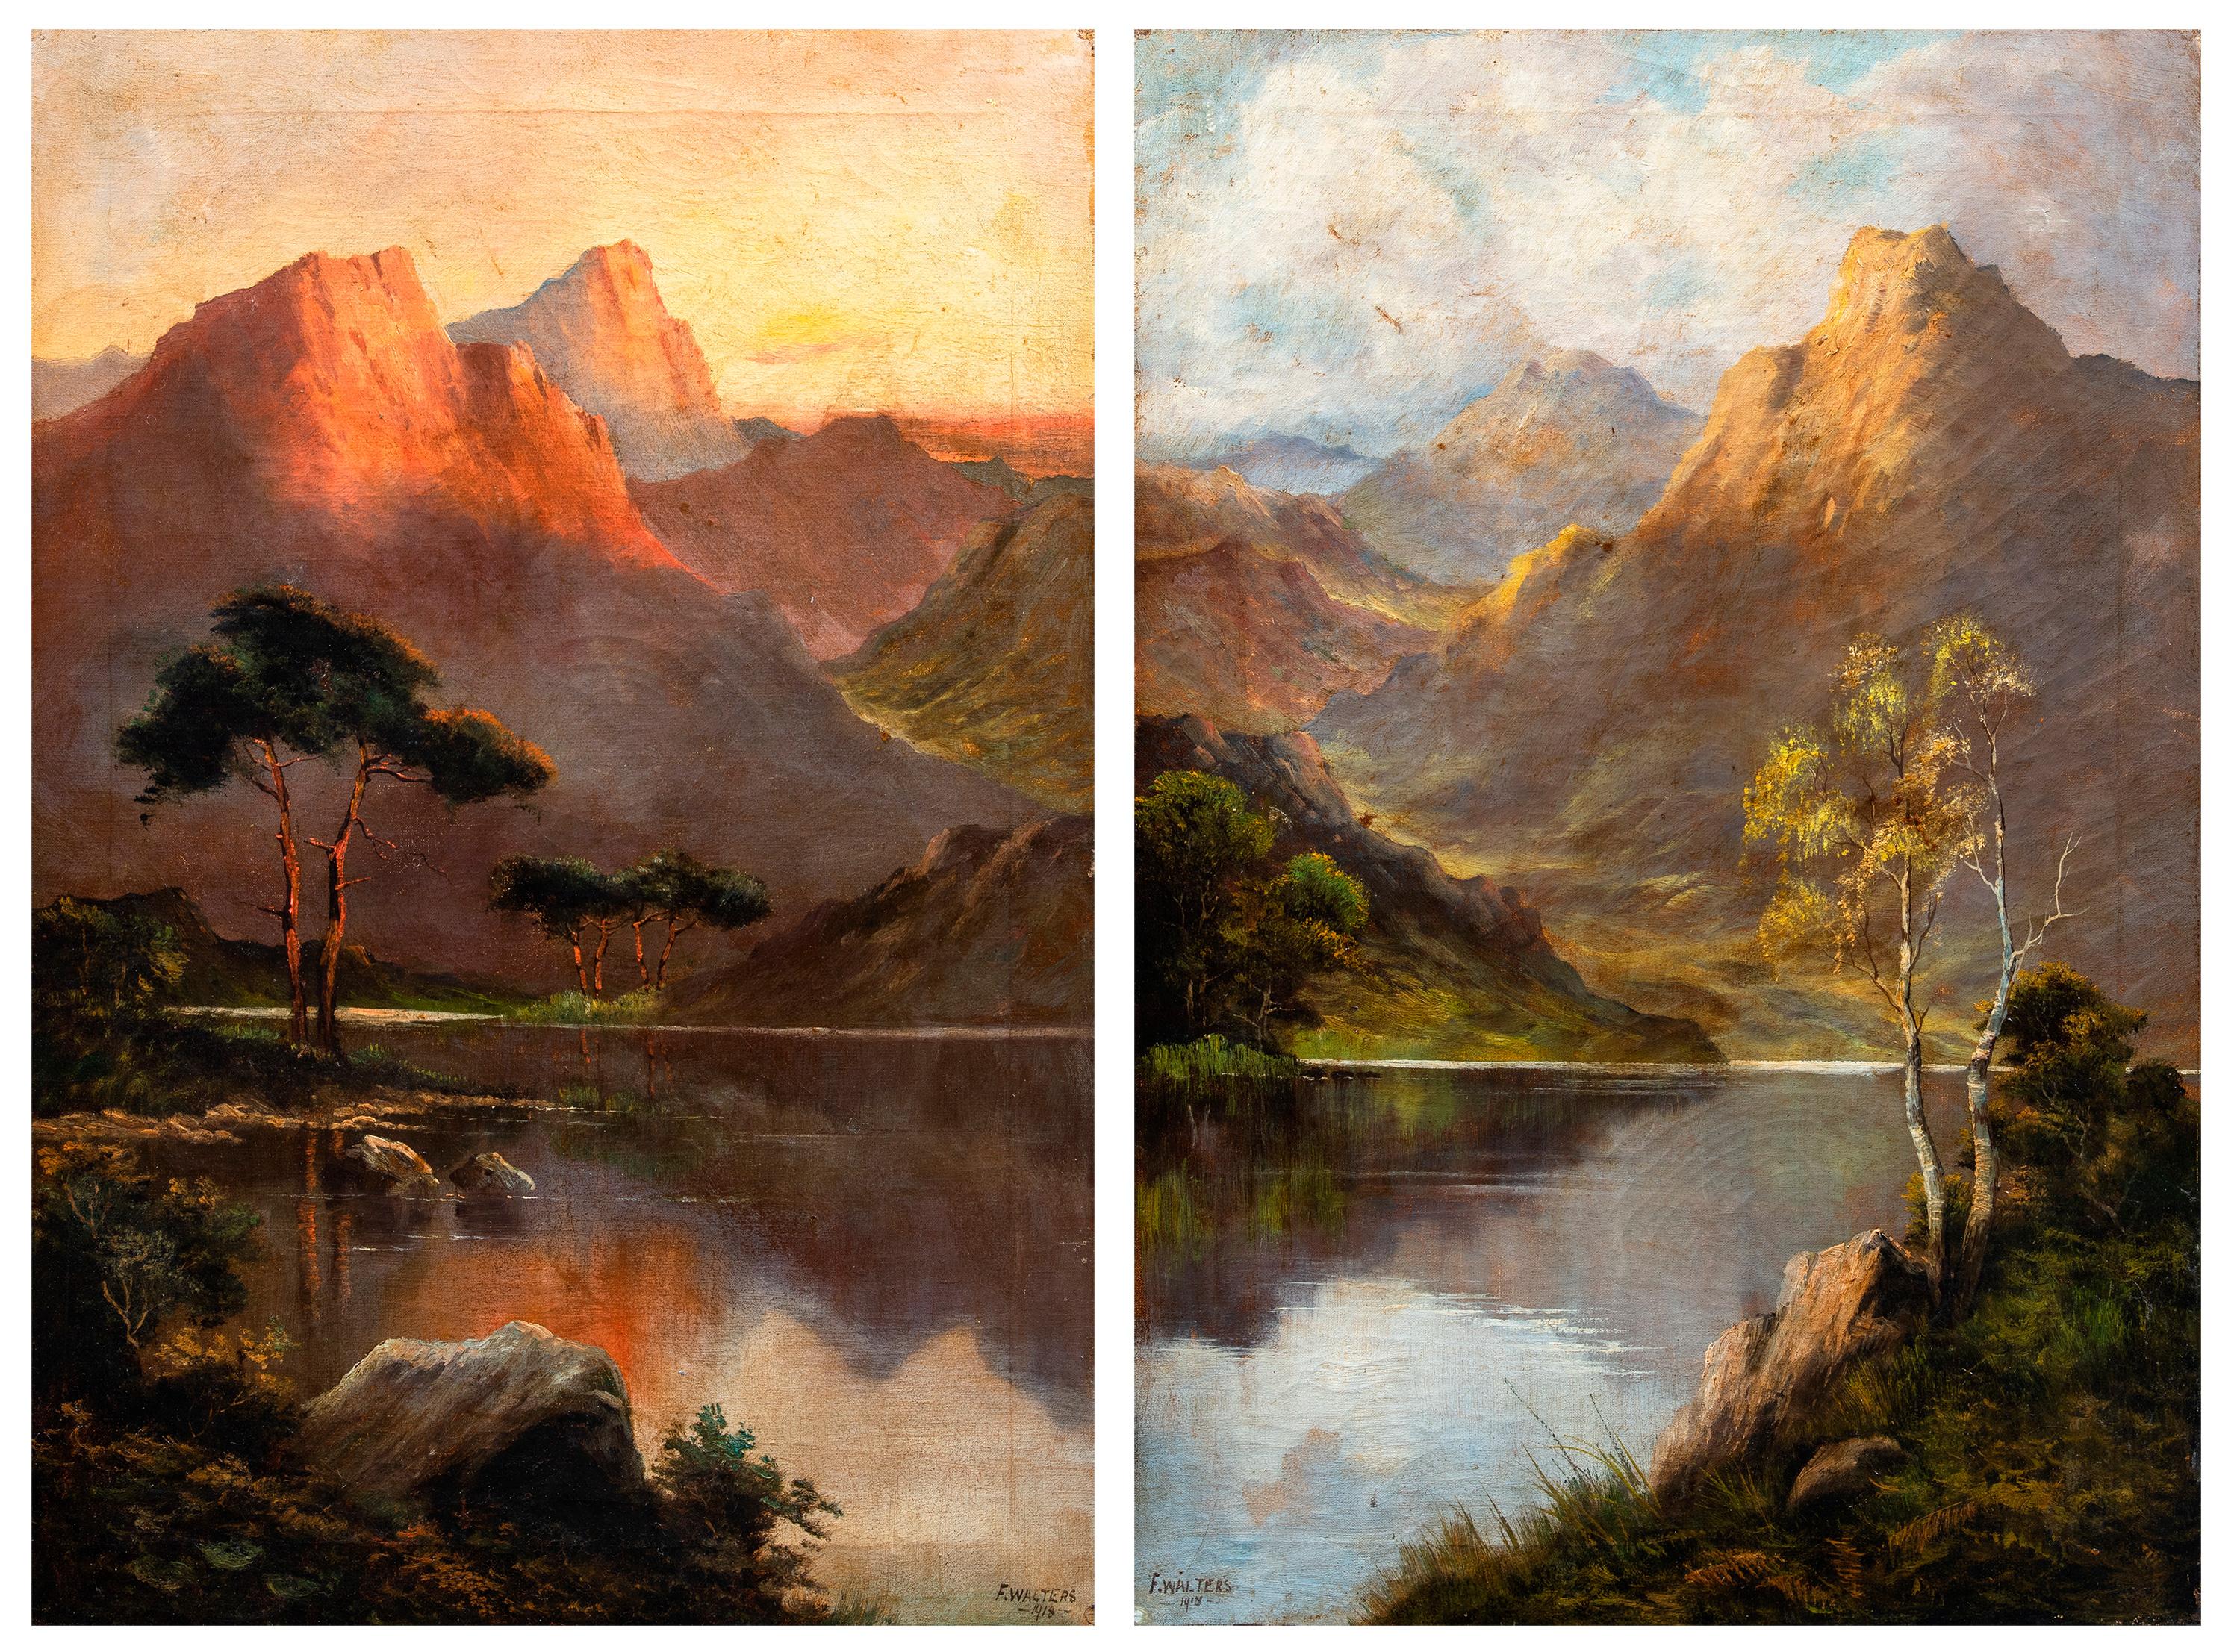 F. Walters - Pair of early 20th century British landscape paintings - Mountains